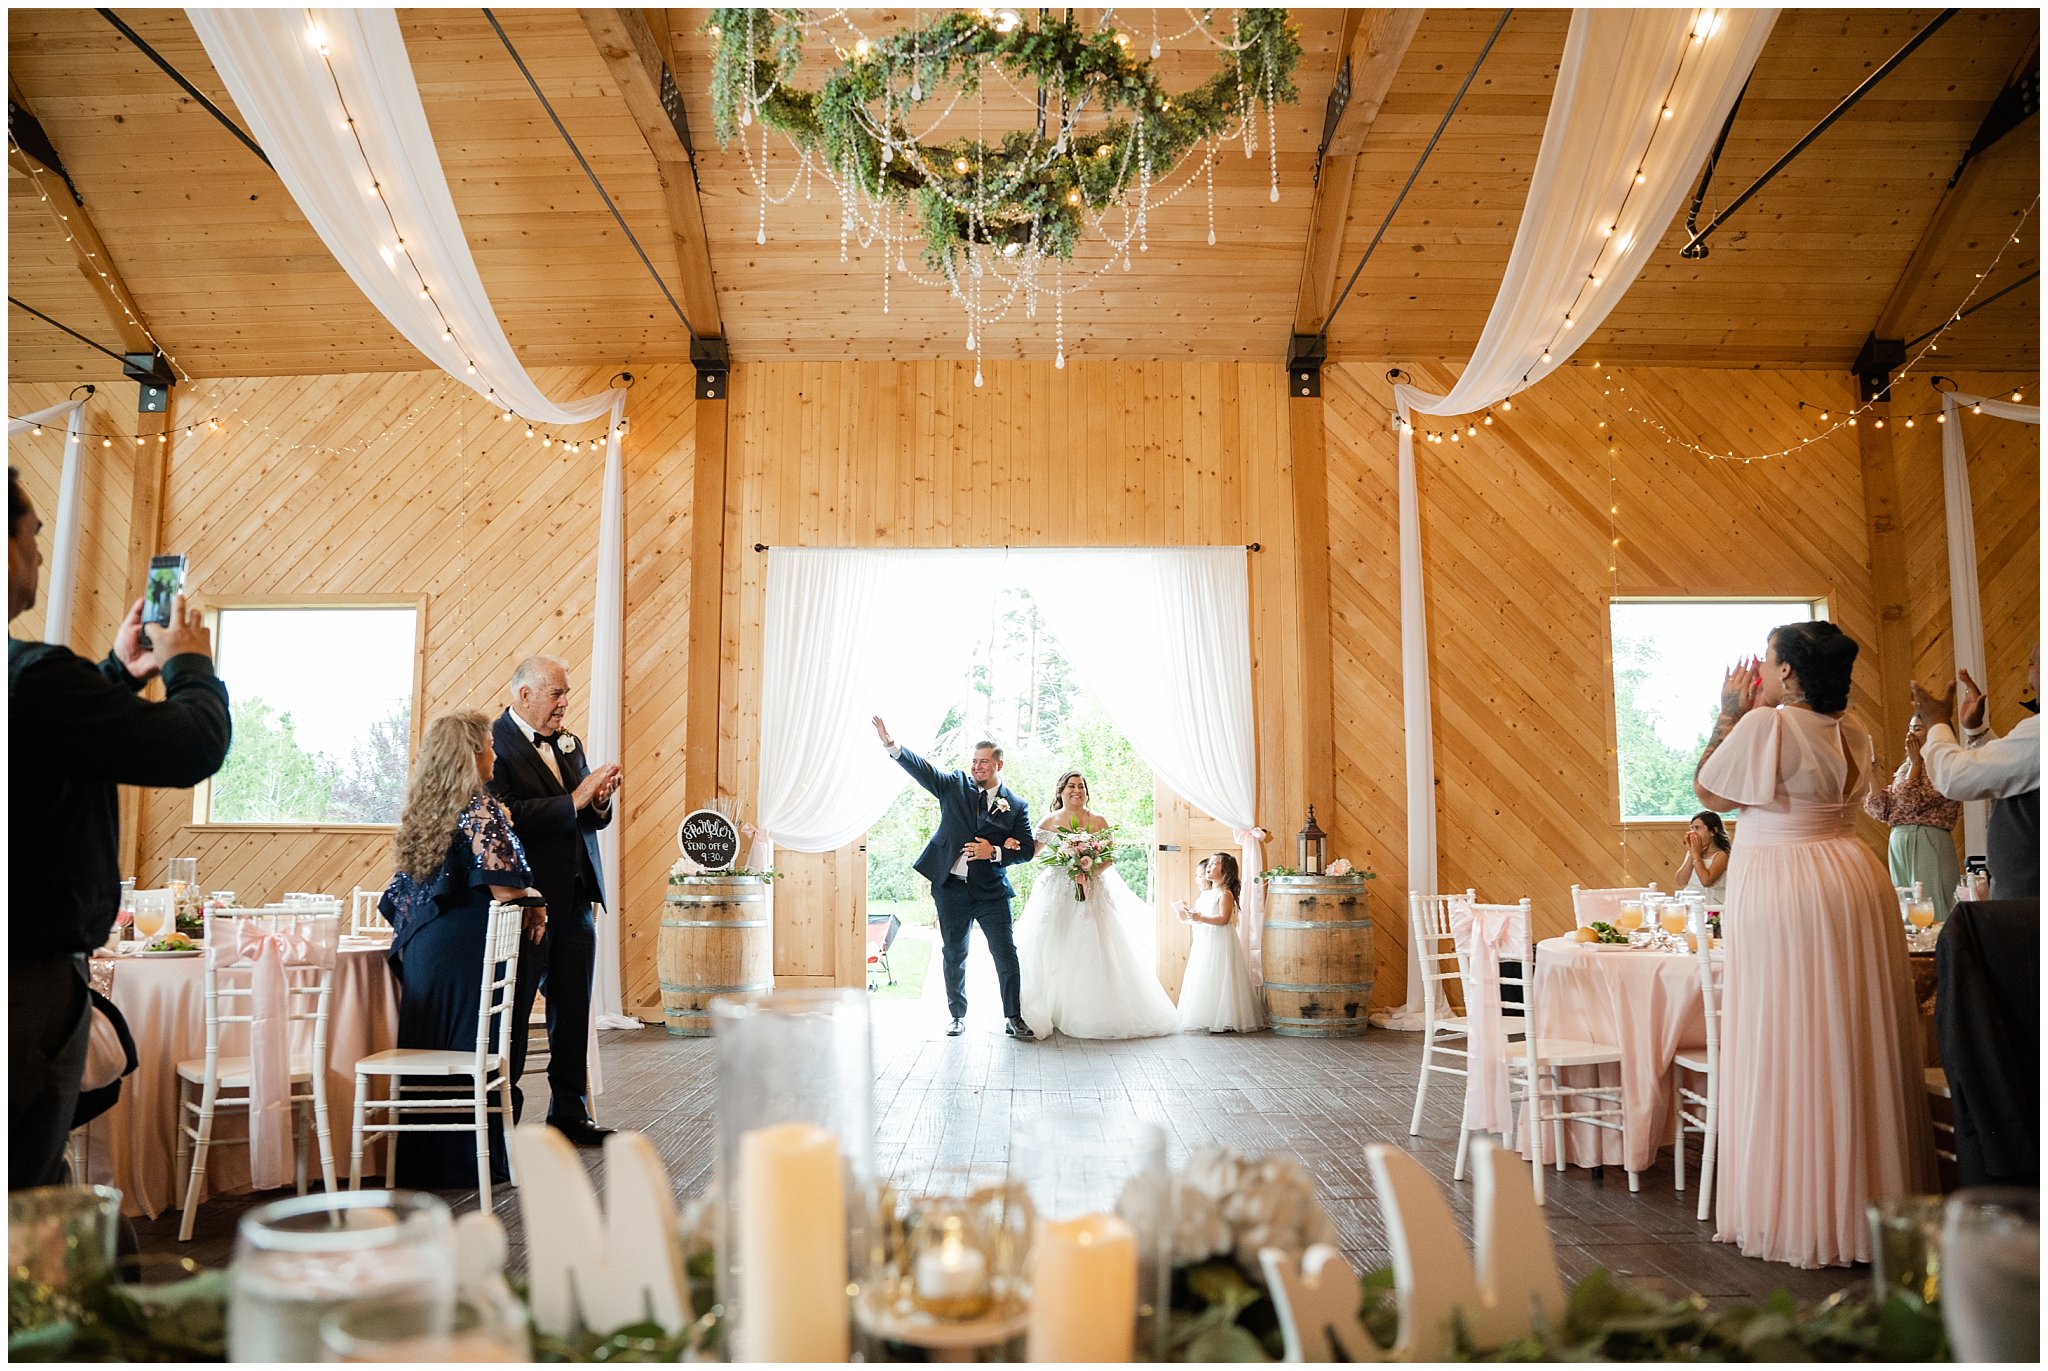 Bride and groom grand entrance into barn | Rustic Mountain Destination Wedding at Oak Hills Utah | Jessie and Dallin Photography